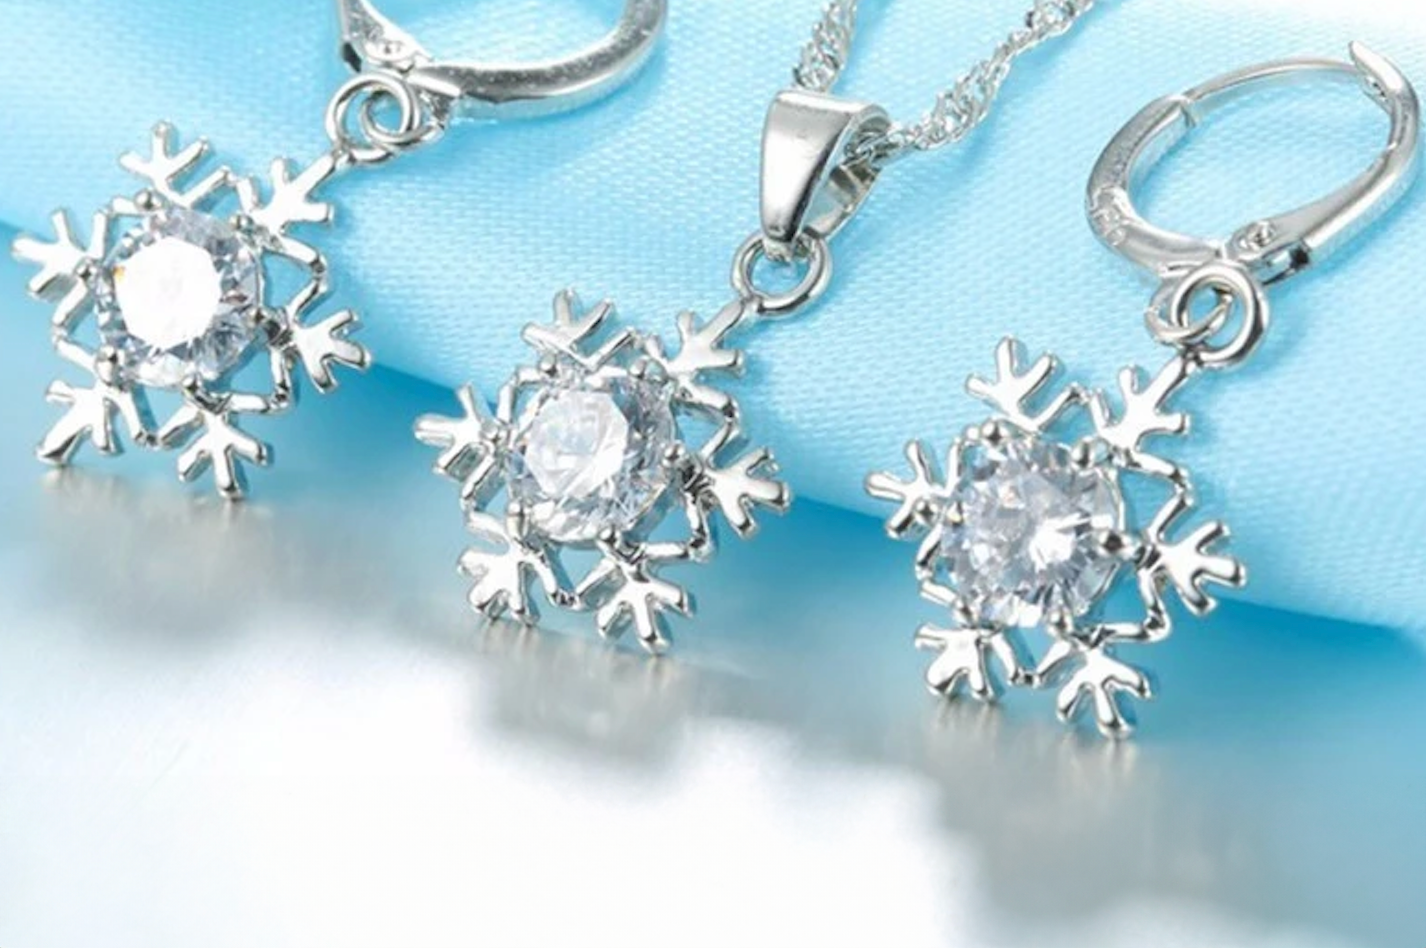 Snowflake Jewelry Set for Women - 925 Sterling Silver with Zircon CZ Crystals | Pendant Necklace & Earrings